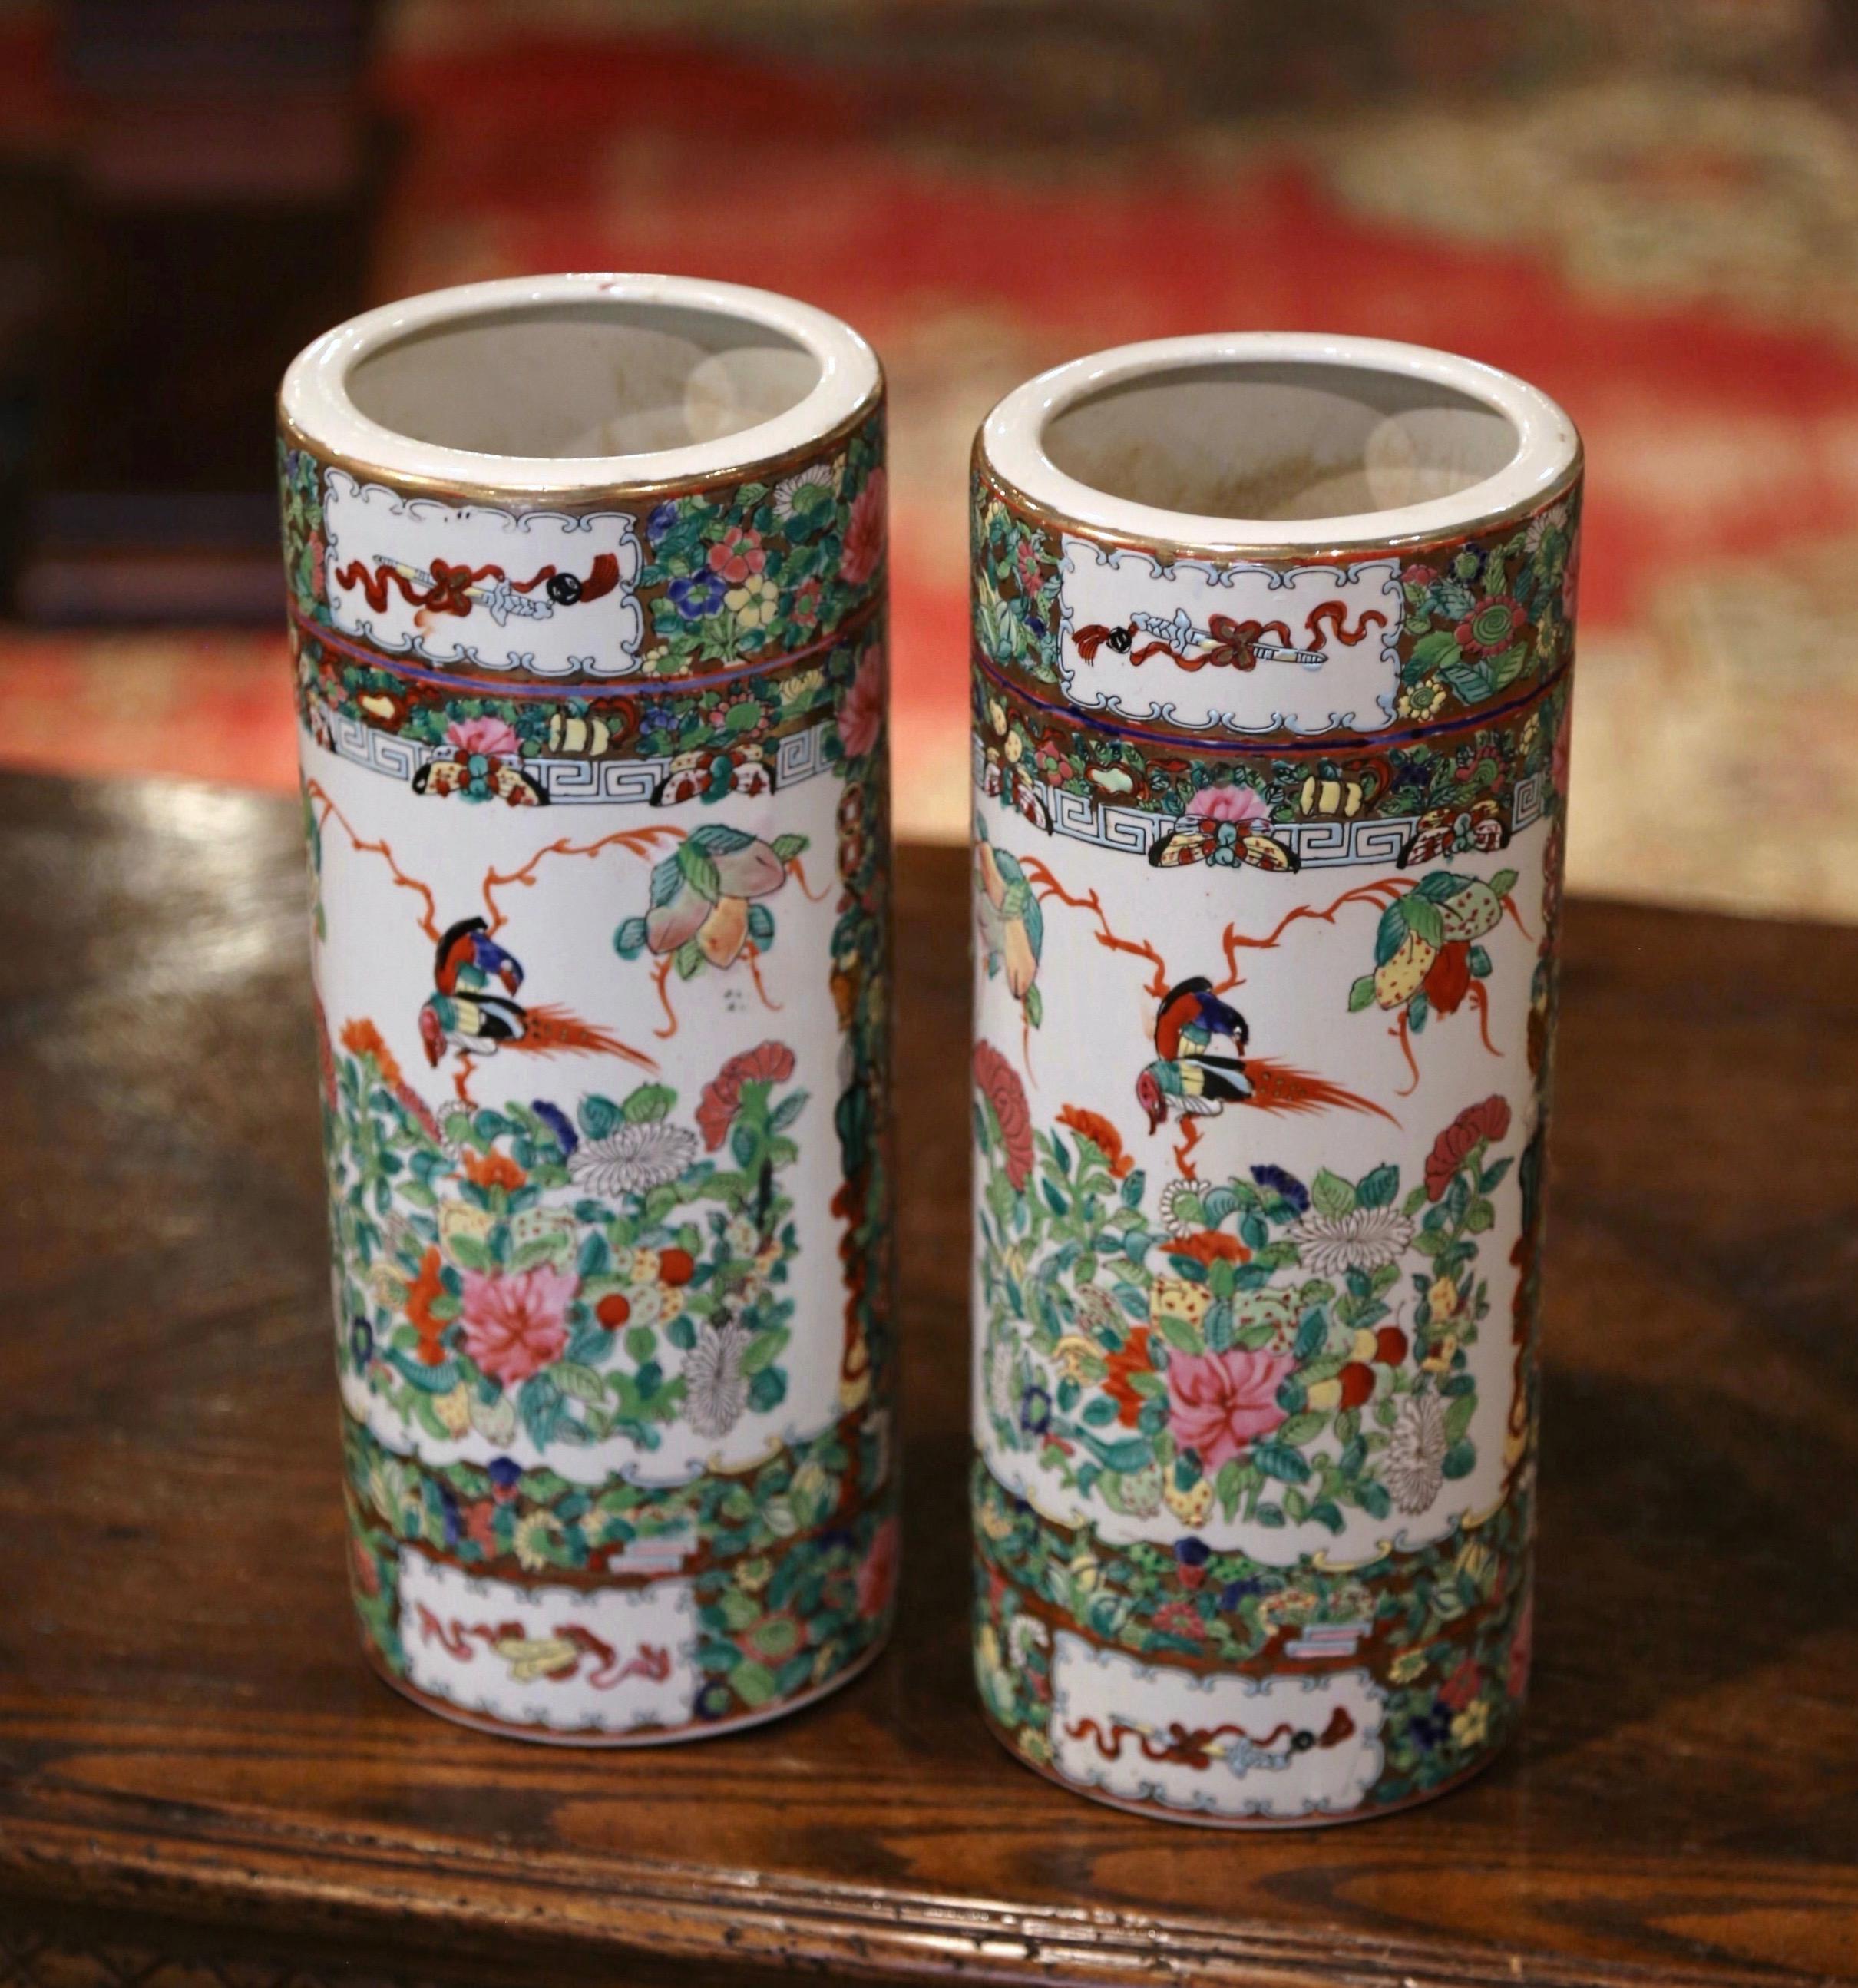 Created in China circa 1950, these colorful rose medallion stands are round in shape and feature hand painted floral reserves with birds and foliate motifs. The porcelain hat stands are in excellent condition with rich colors embellished with gilt